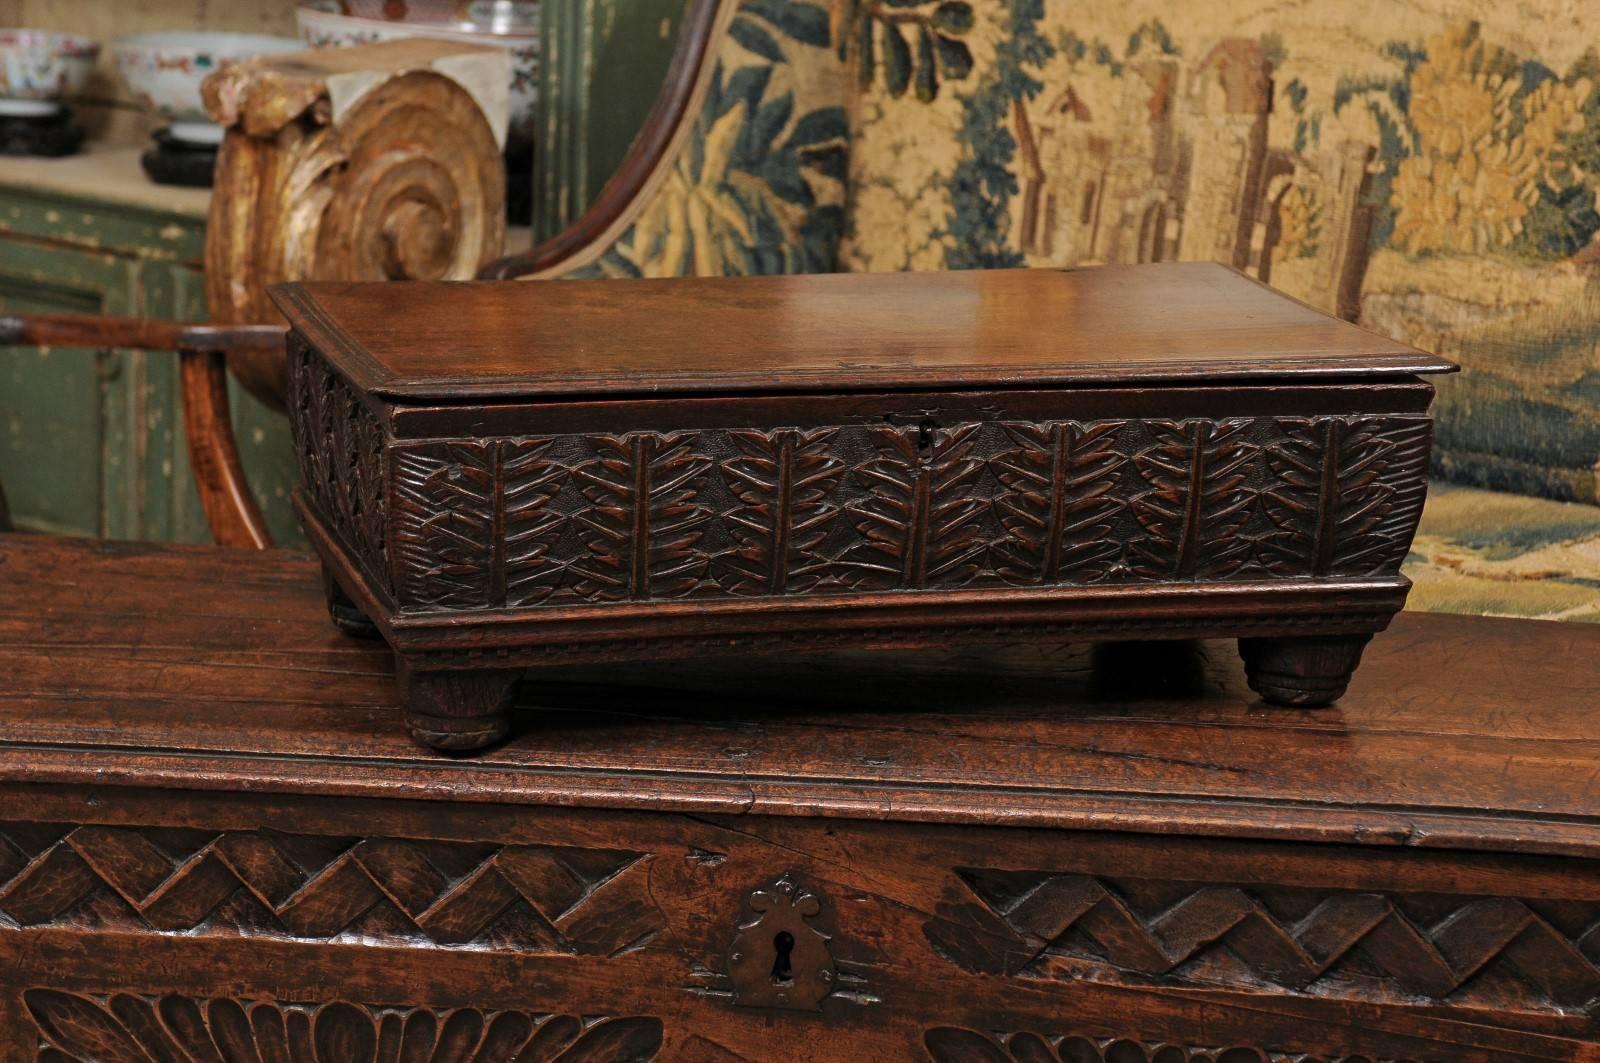 19th Century English oak bible box with foliate carving, tapered feet, & hinged lid.